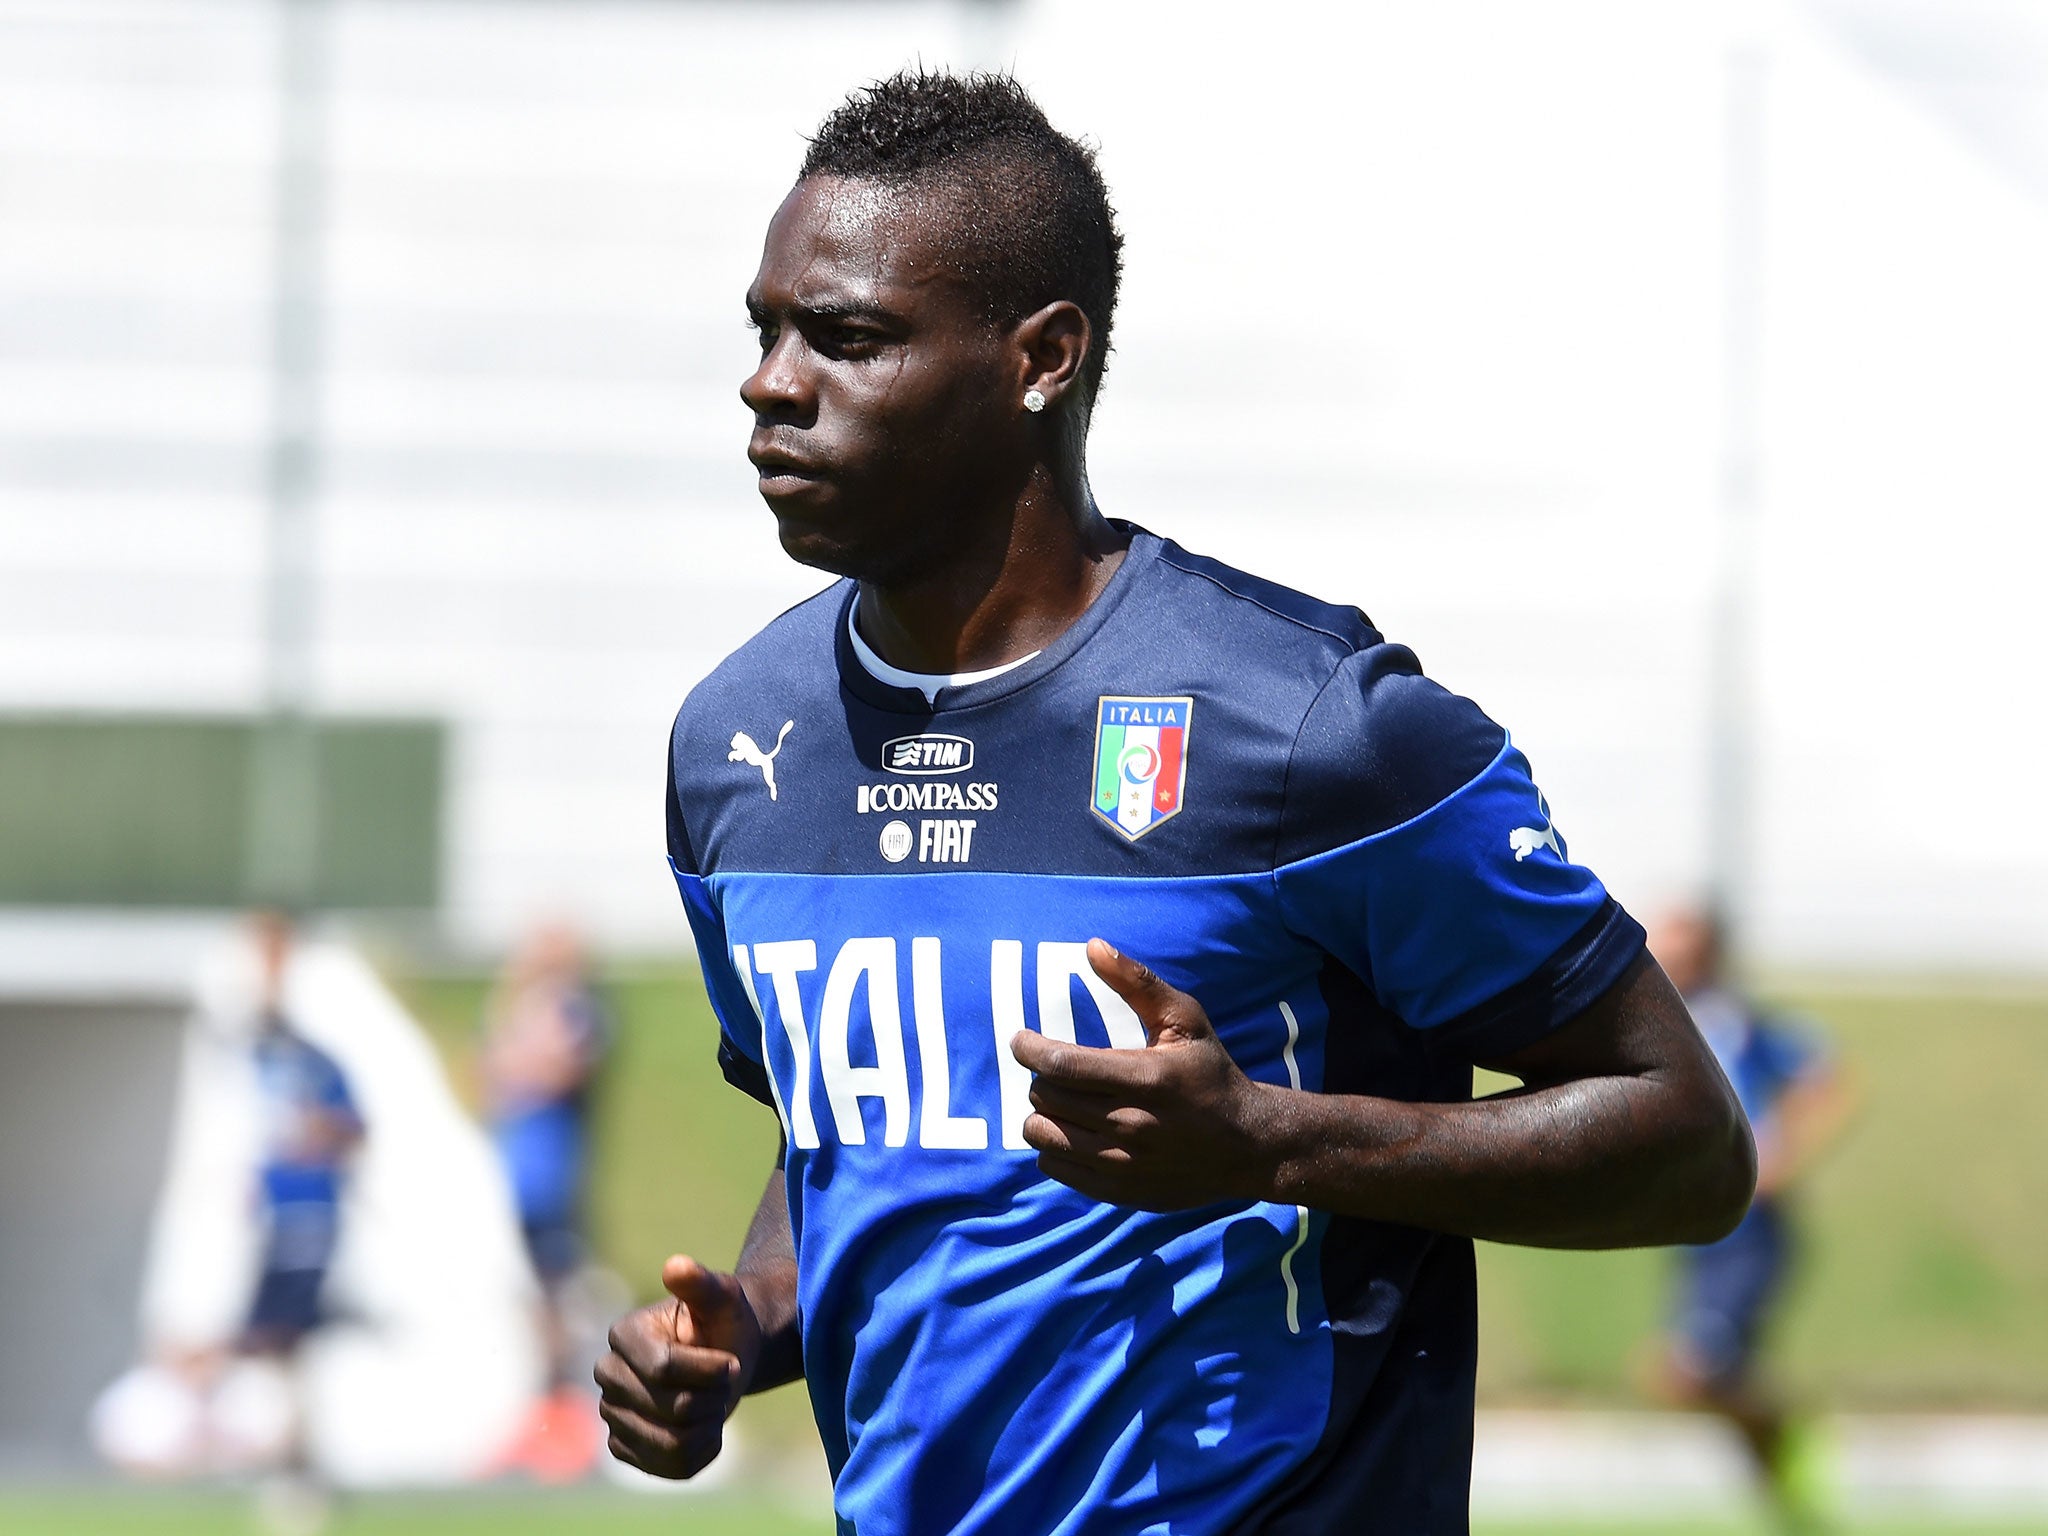 AC Milan are willing to listen to offers of around £30m for Arsenal target Mario Balotelli